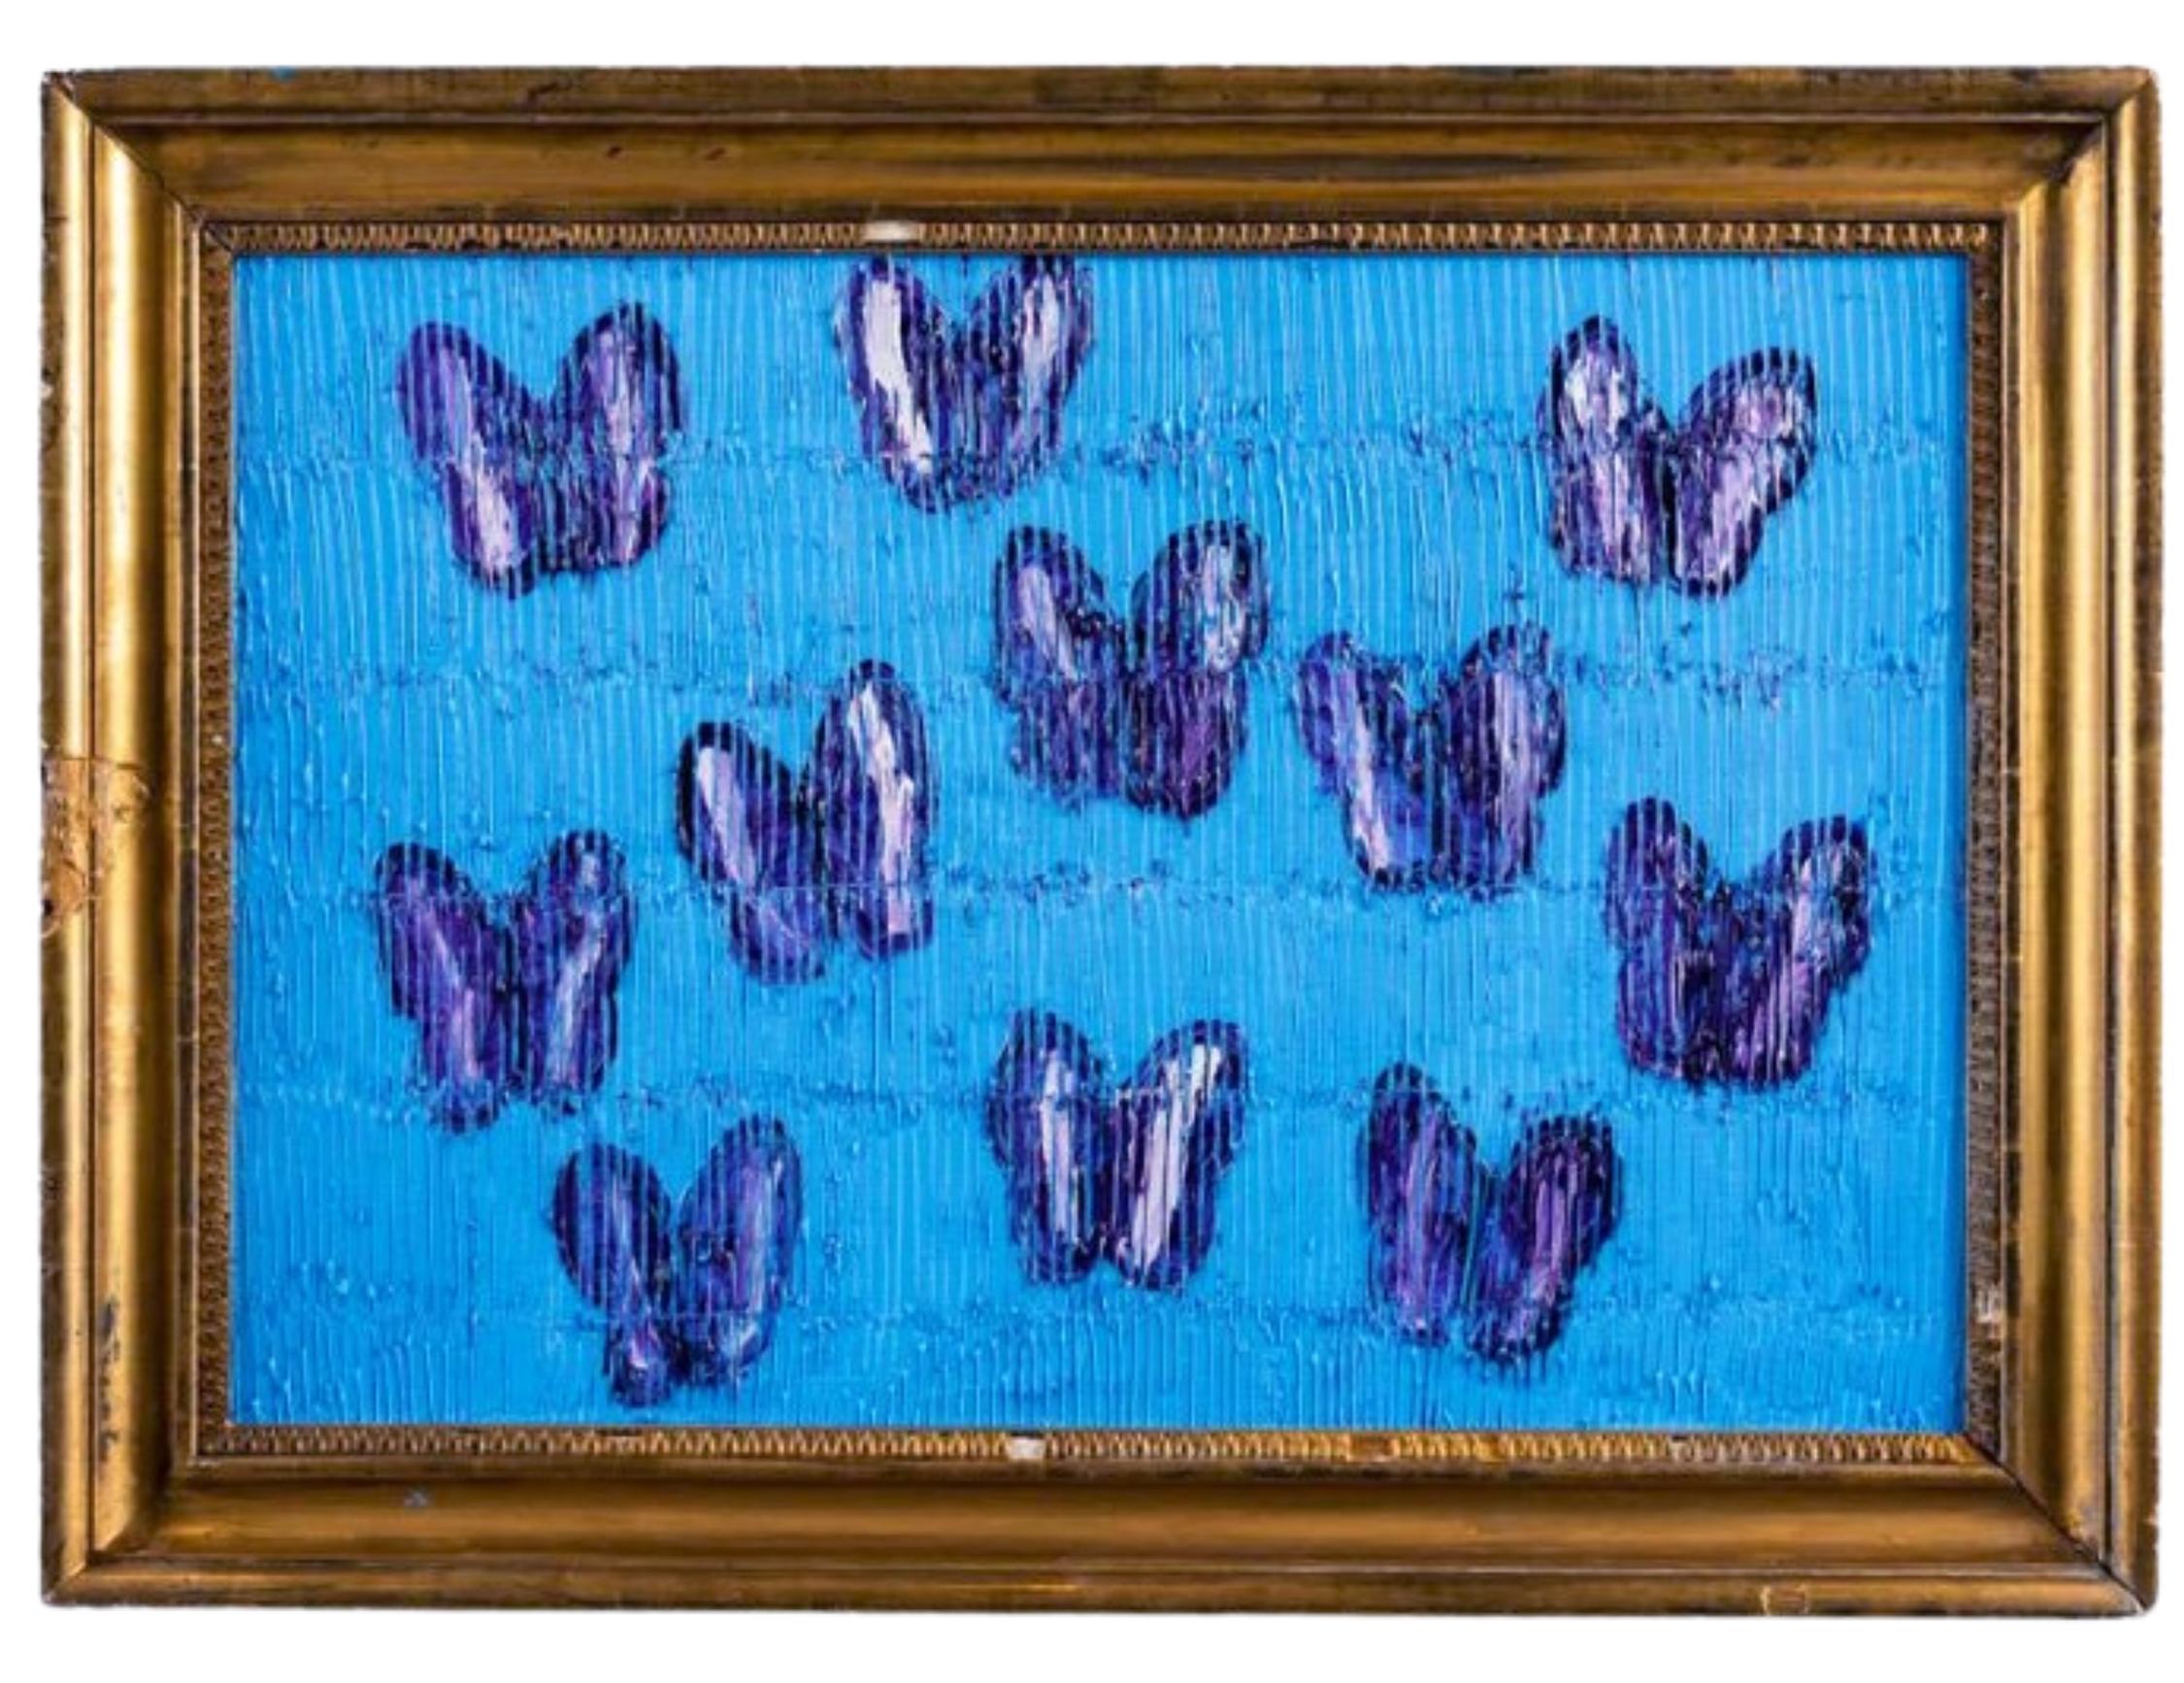 Renowned artist Hunt Slonem's "Morning Cloaks Migration" is a 20 1/2 x30 colorful blue scored oil painting on wood board of contemporary abstract butterflies in purple finished in his choice of antique framing. 

*Painting is framed - Please note